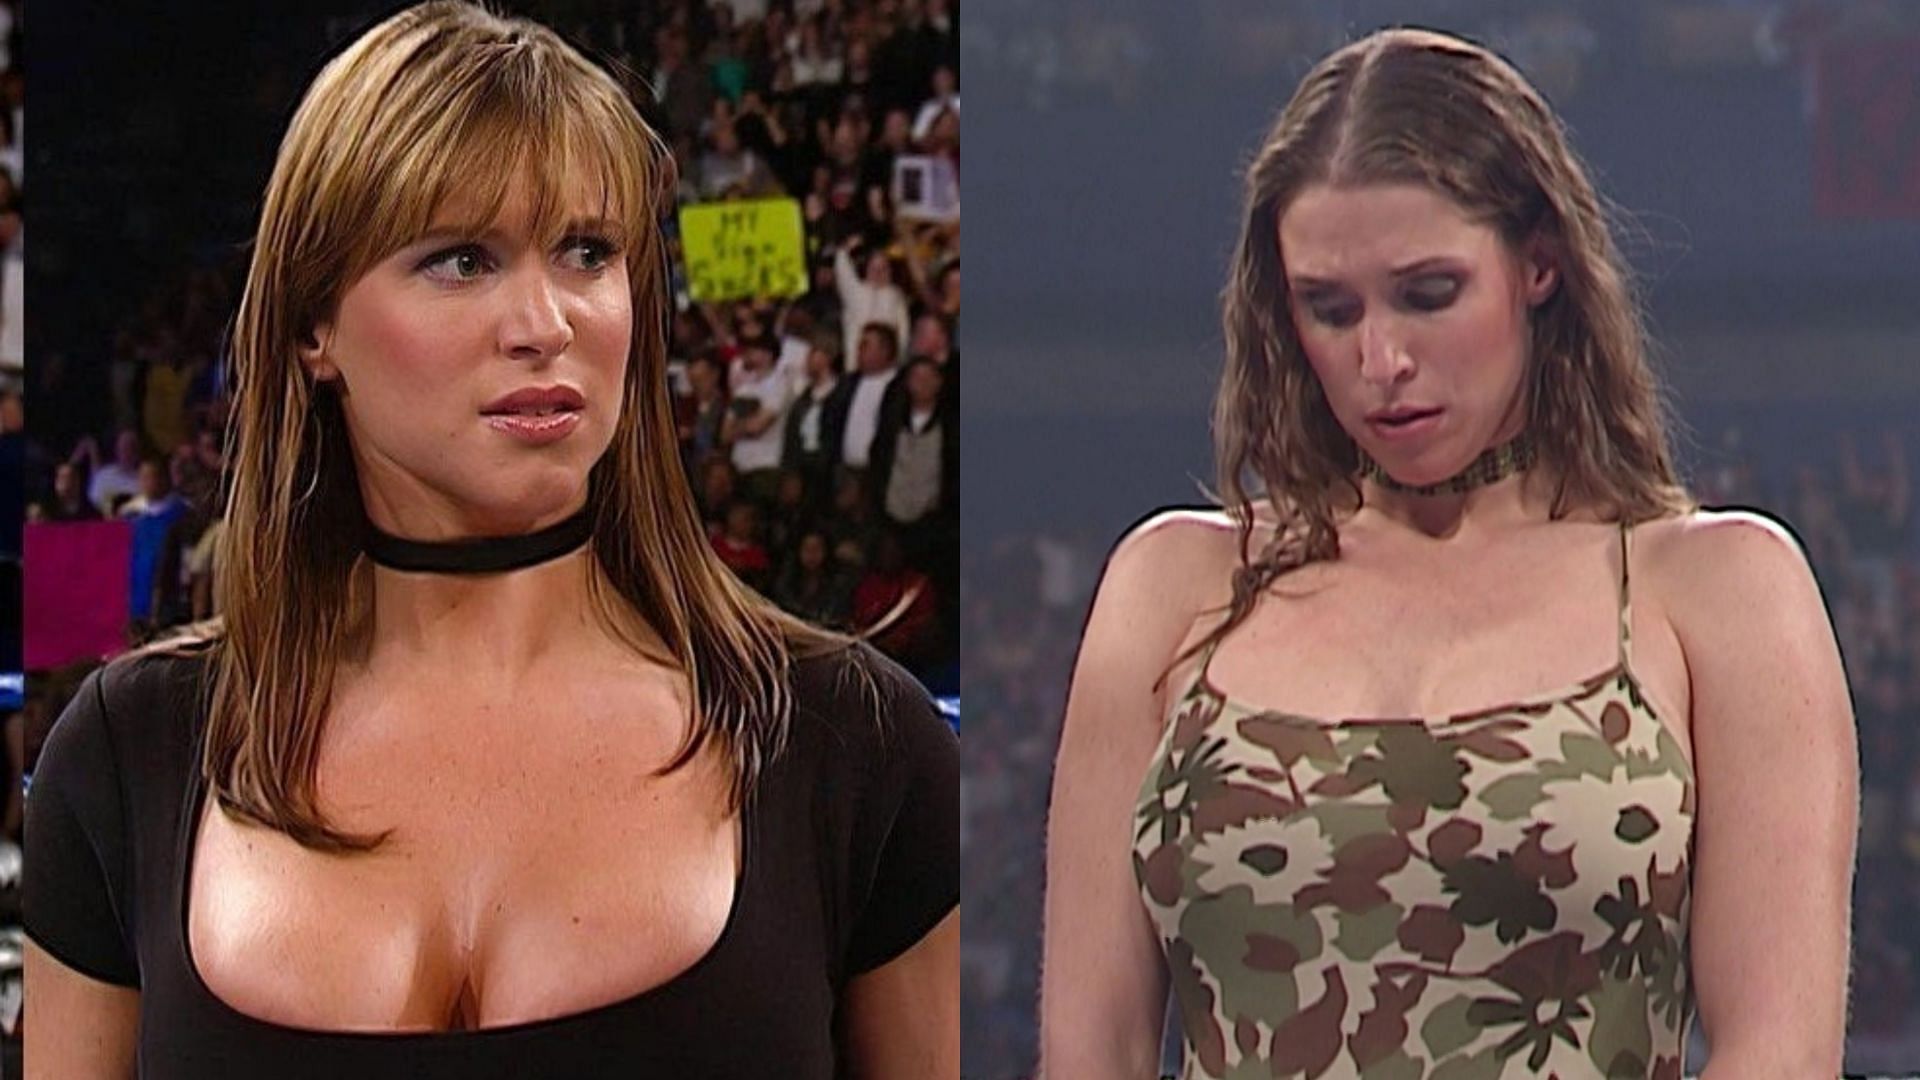 christina varrato recommends wwe stephanie mcmahon naked pic